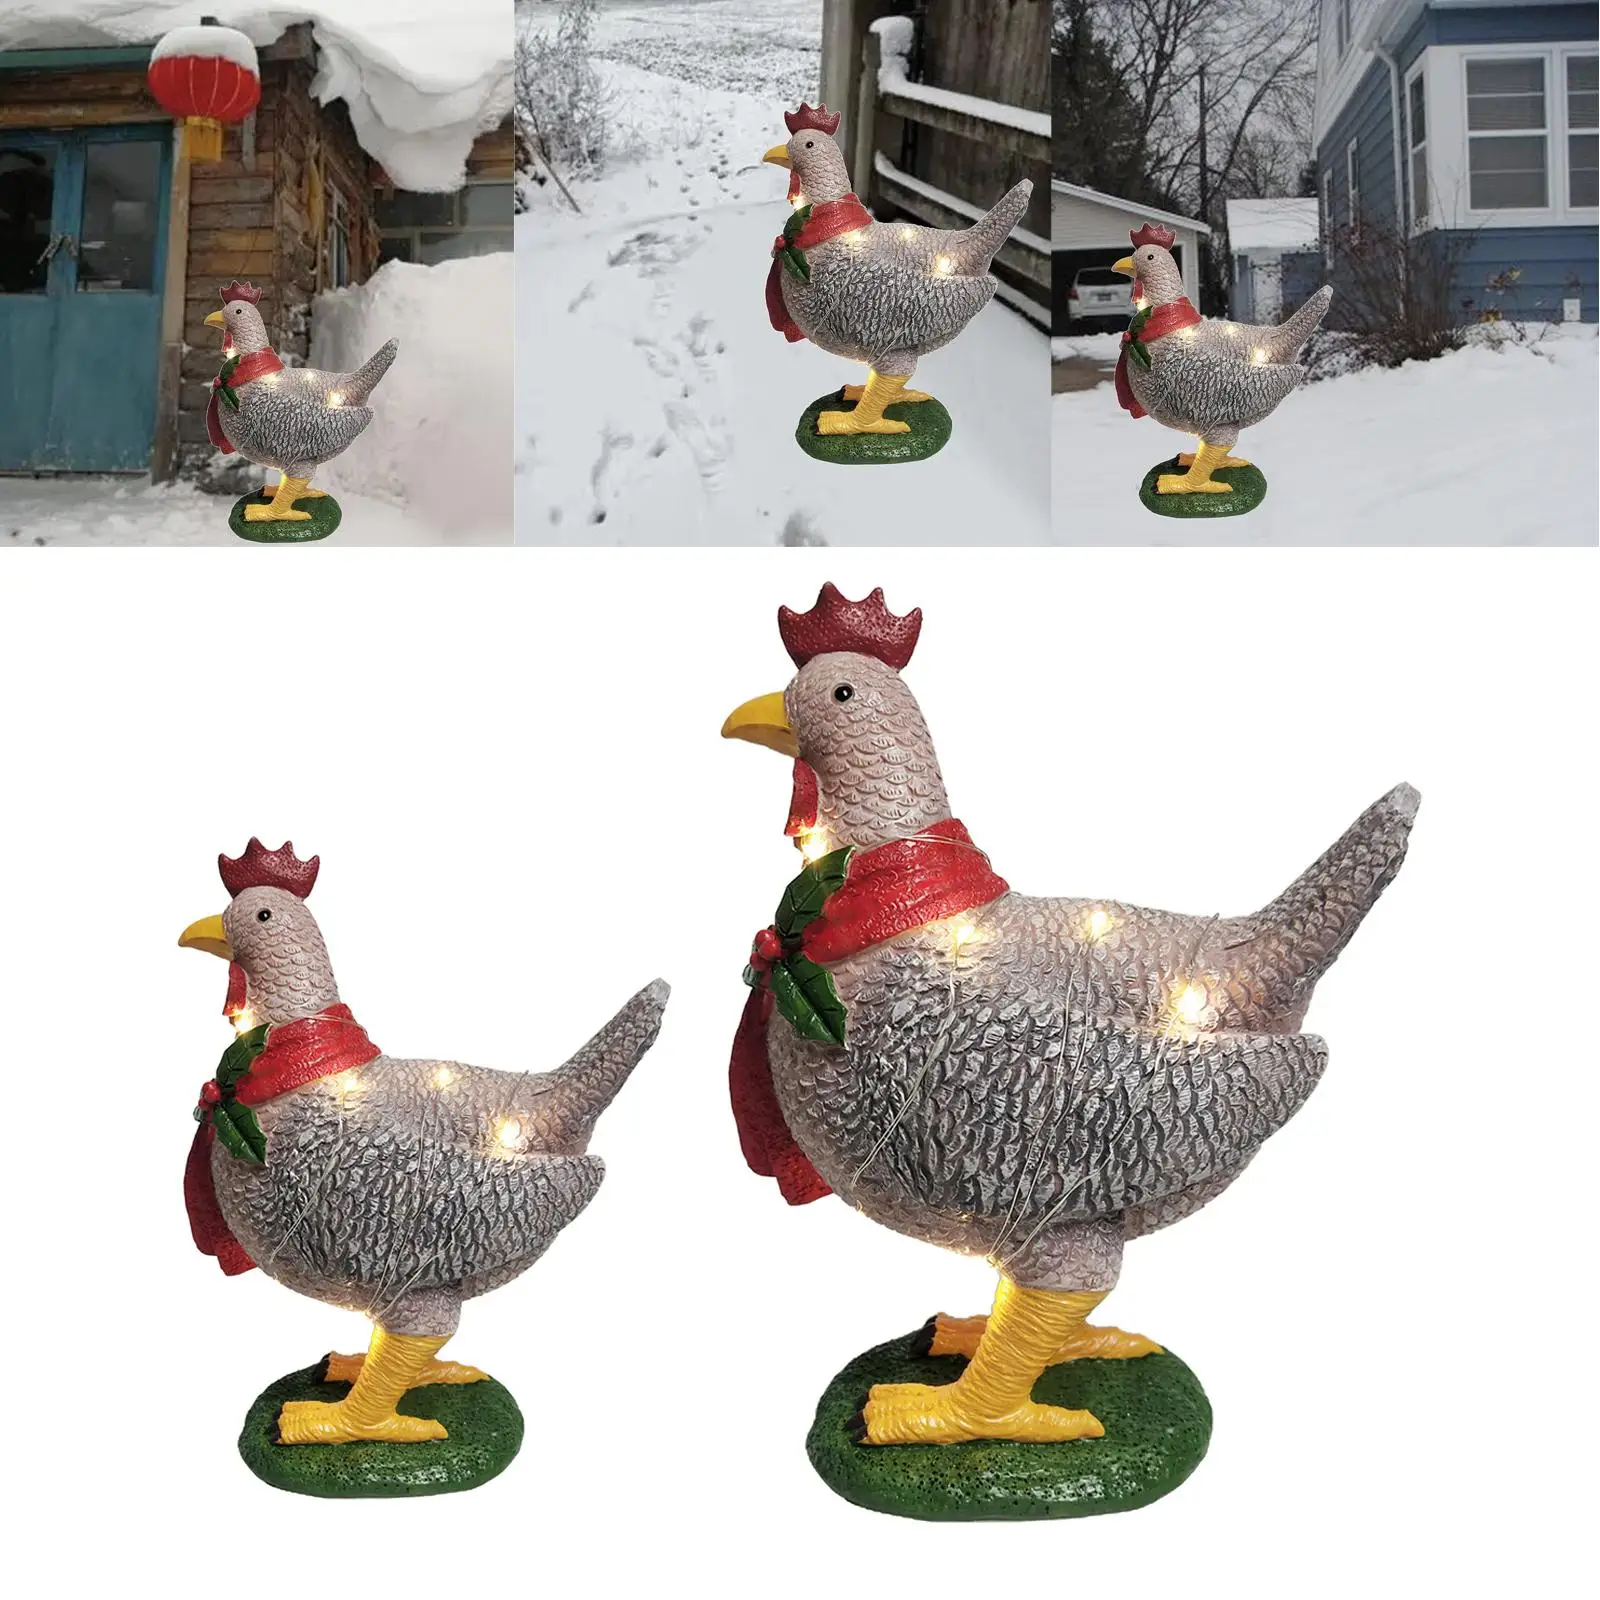 Resin Light-up Chicken with Scarf Christmas Ornaments Yard Art for Patio